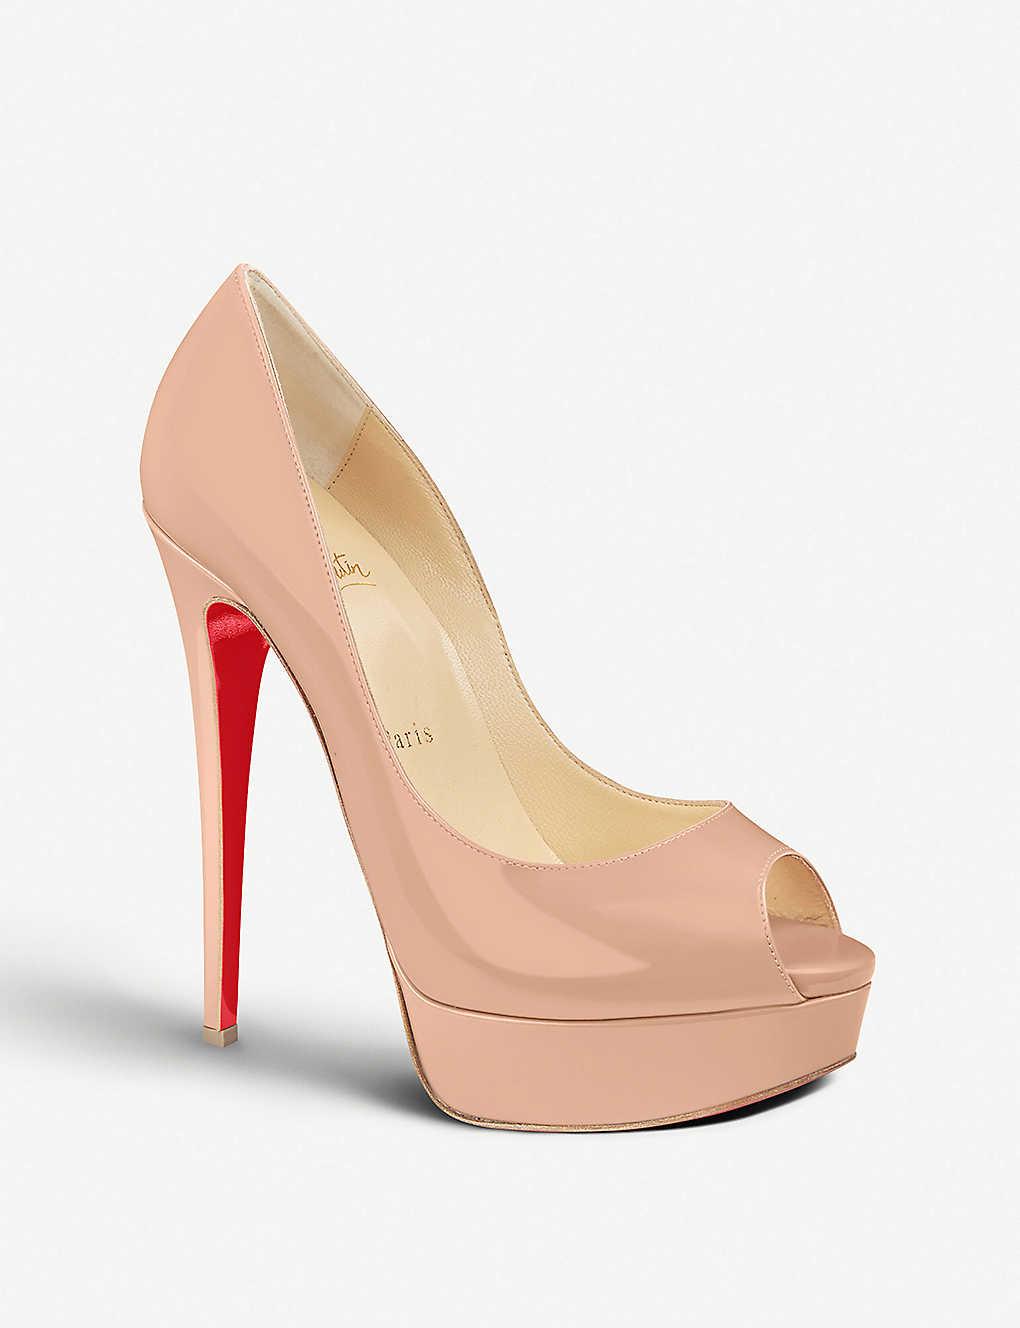 Christian Louboutin Lady Peep 150 Patent Calf in Natural | Lyst